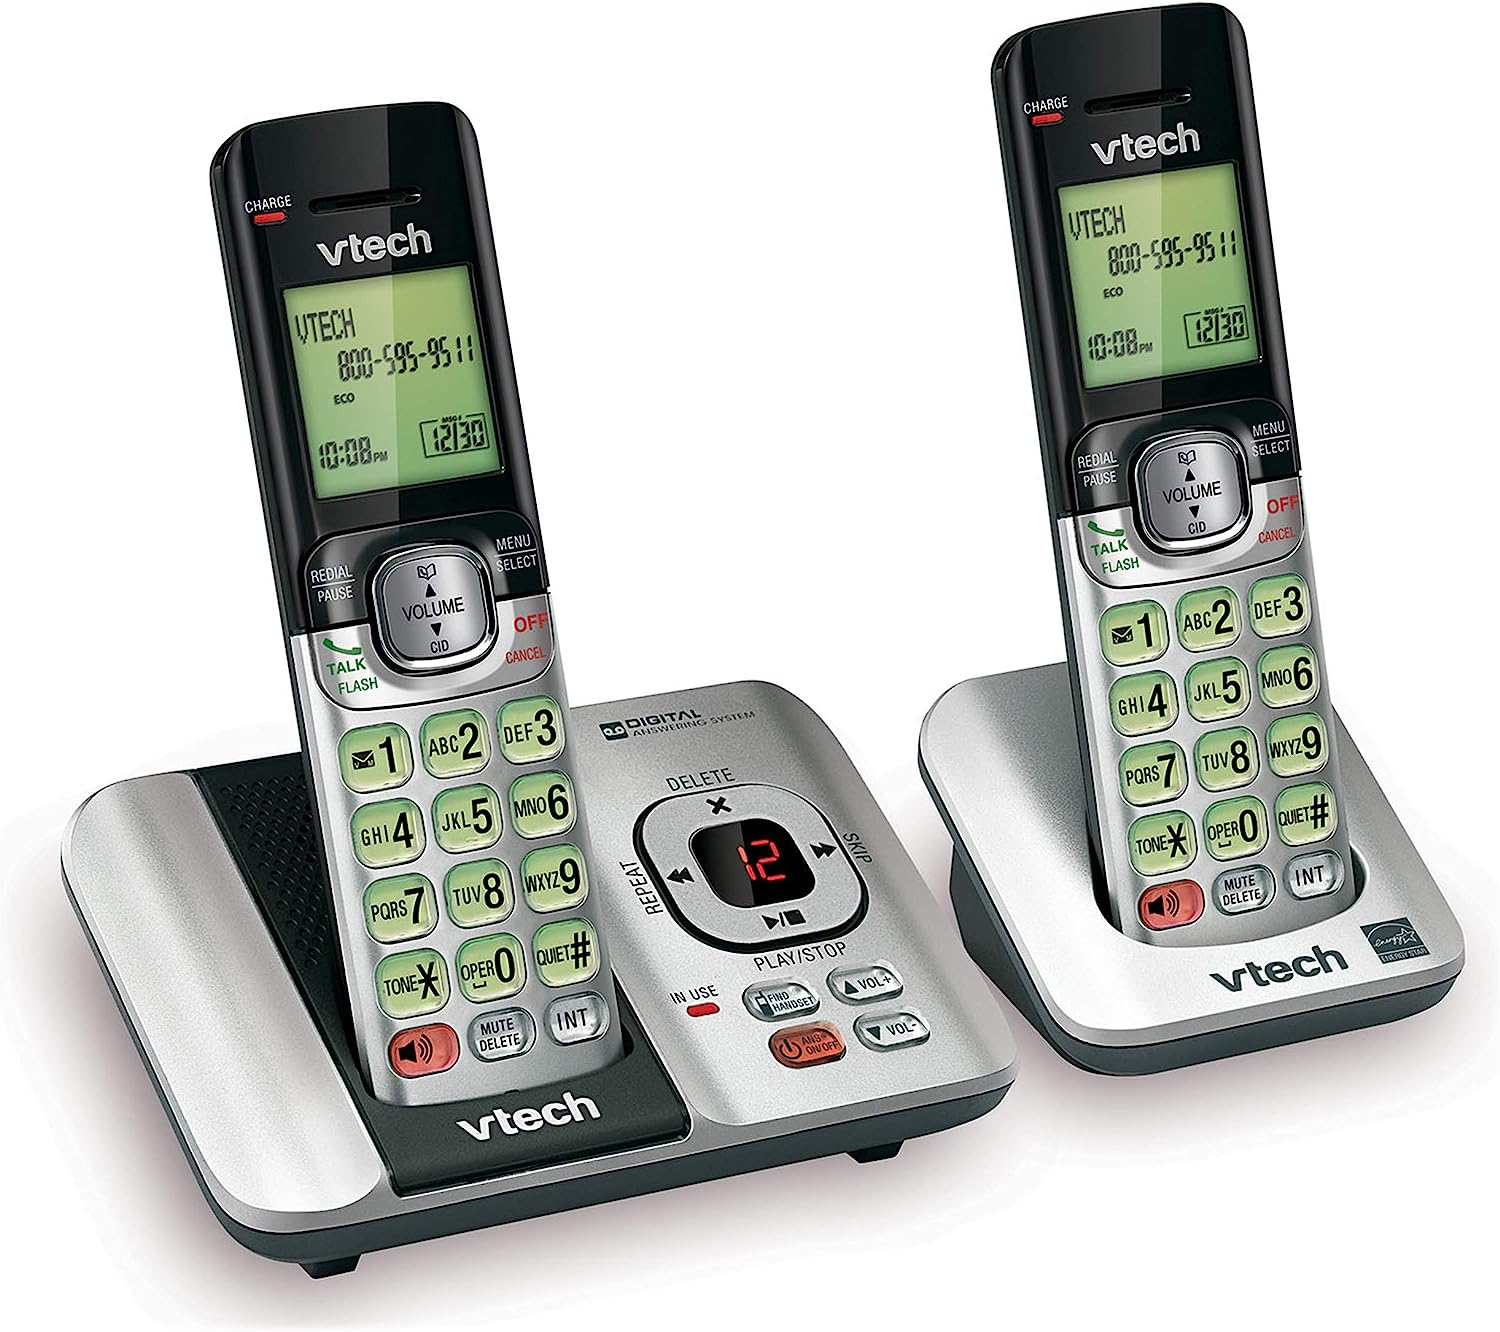 VTech CS6529-2 DECT 6.0 Phone Answering System with [...]